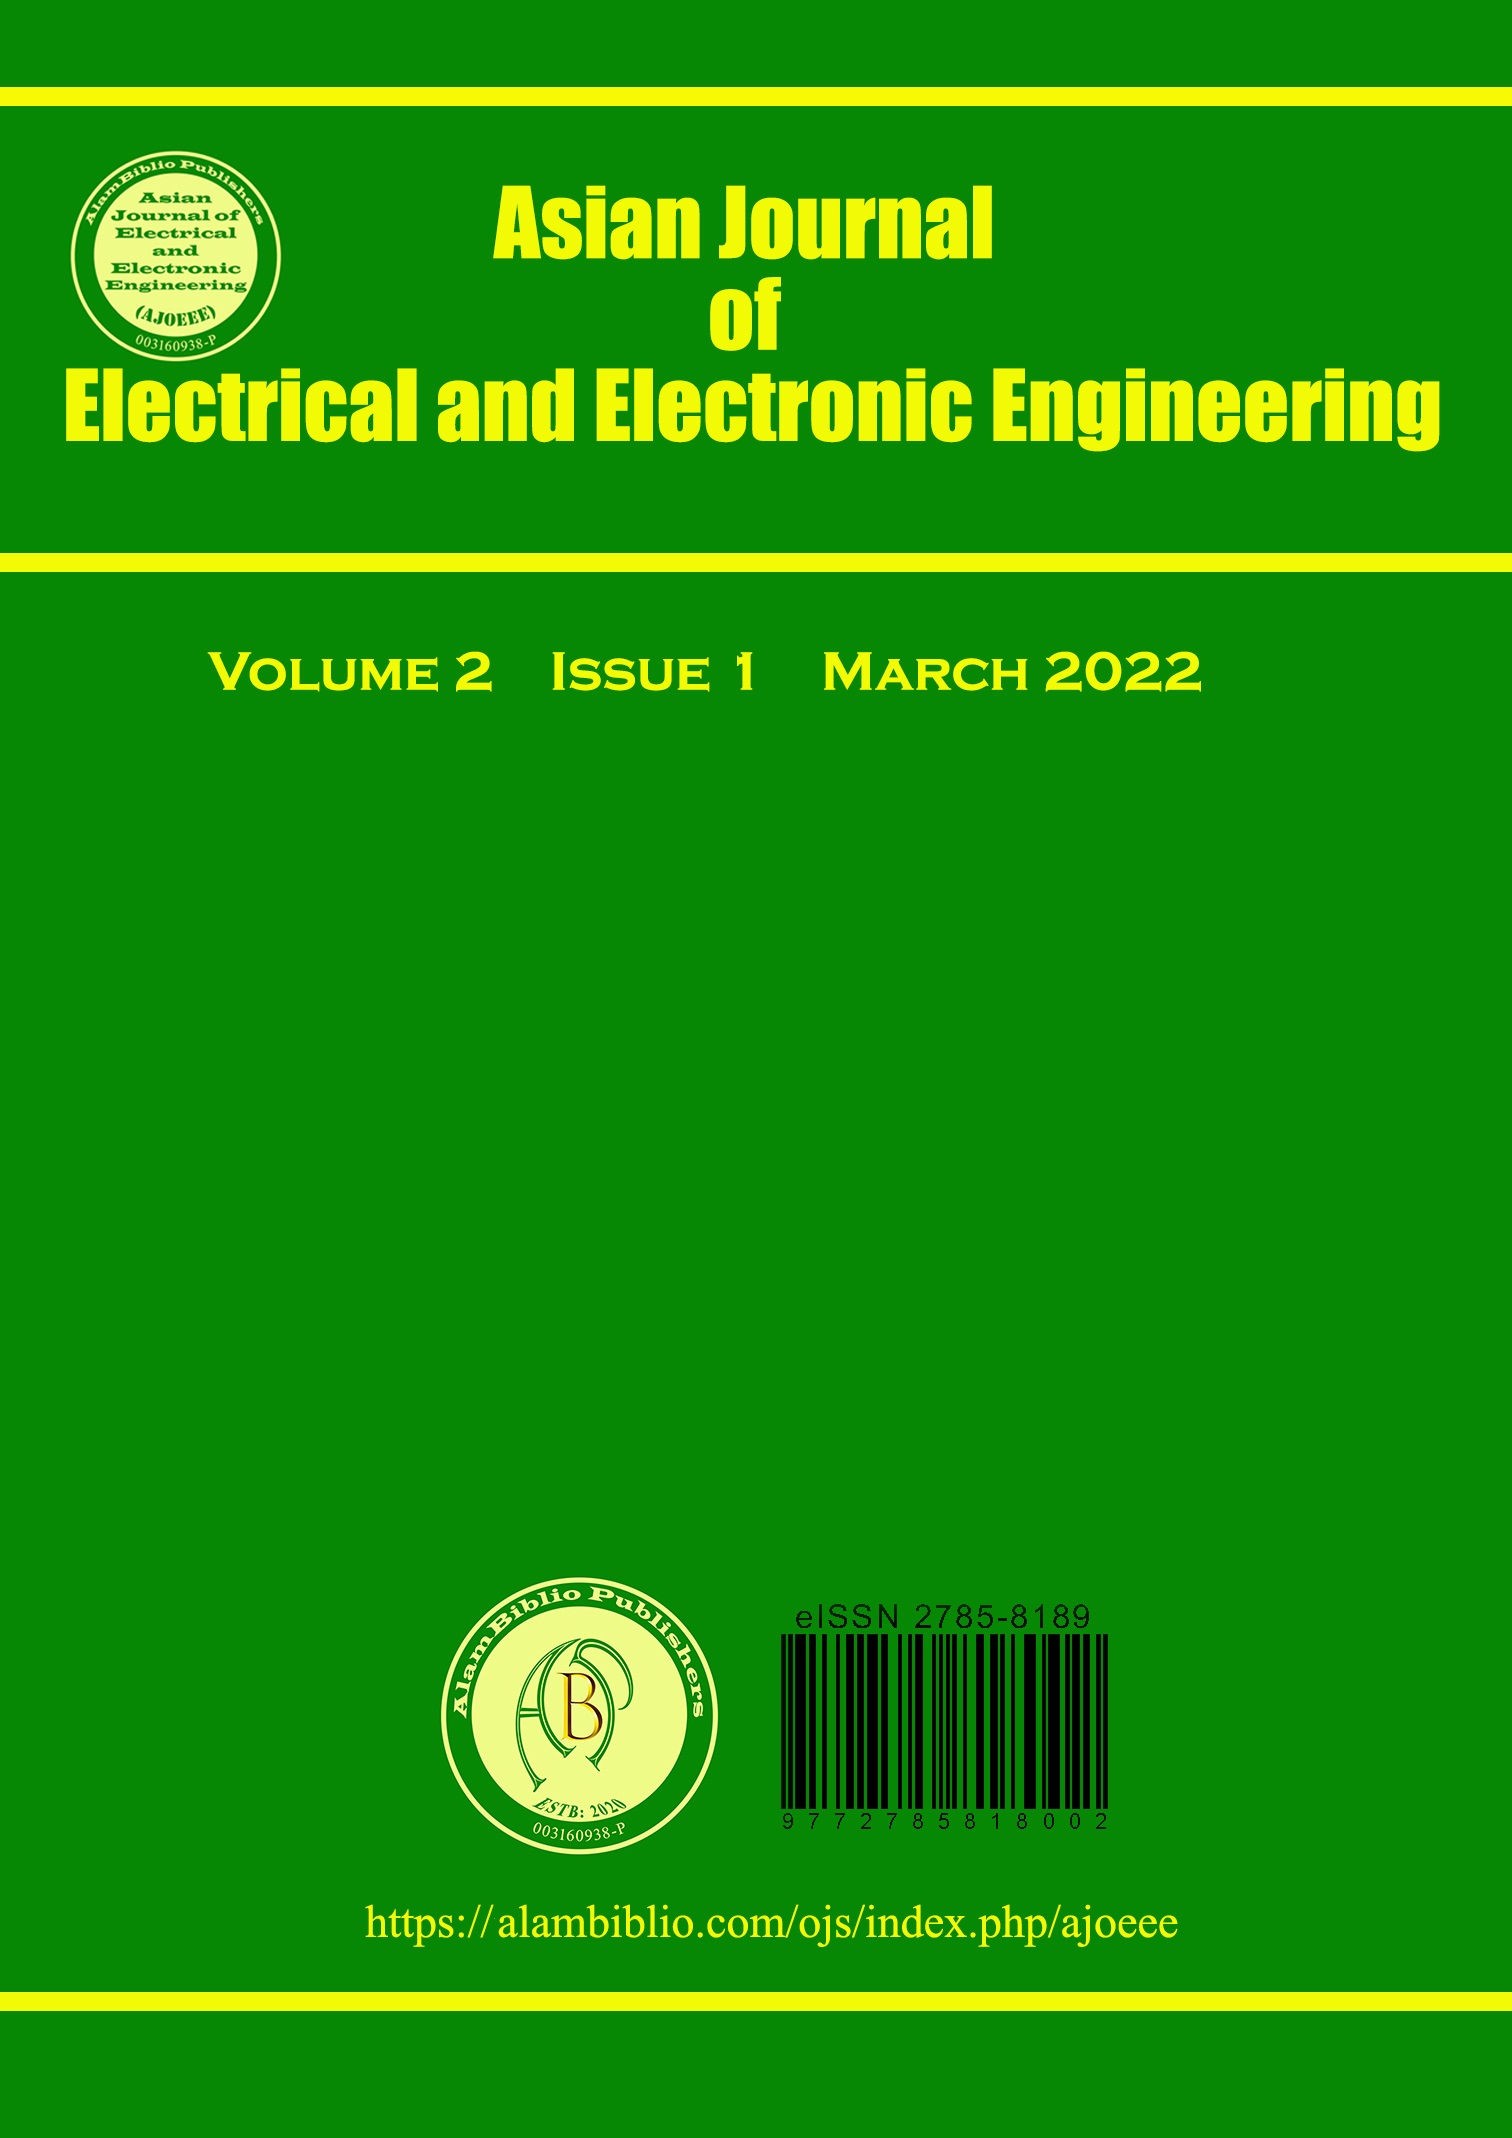 Asian Journal of Electrical and Electronic Engineering Vol 2 No 1